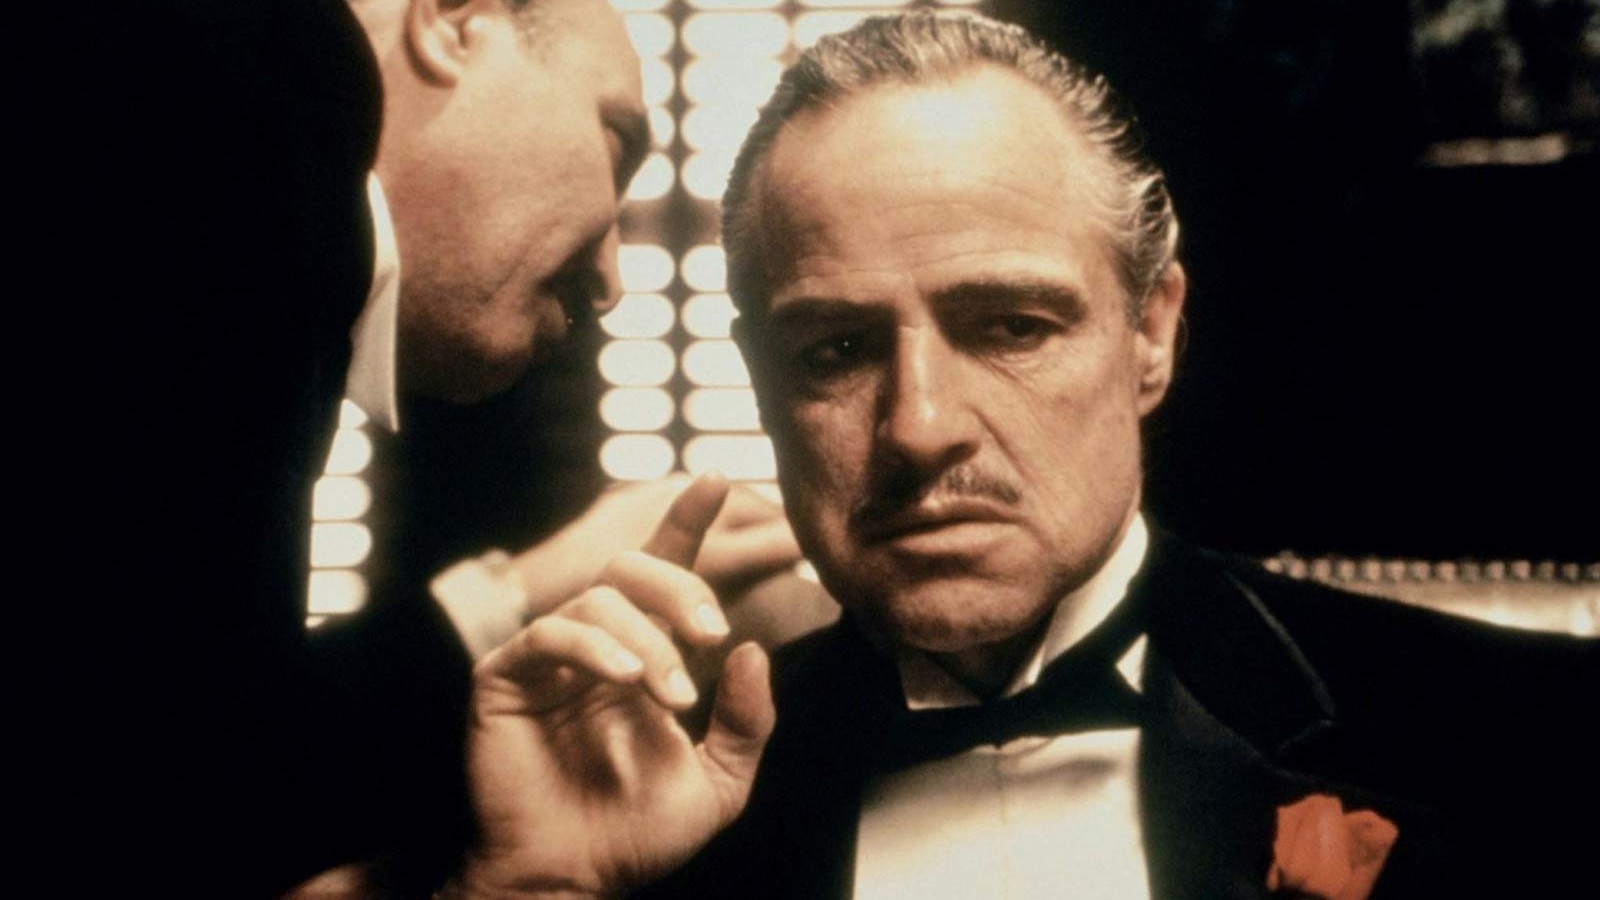 watch the godfather 2 with english subtitles online free